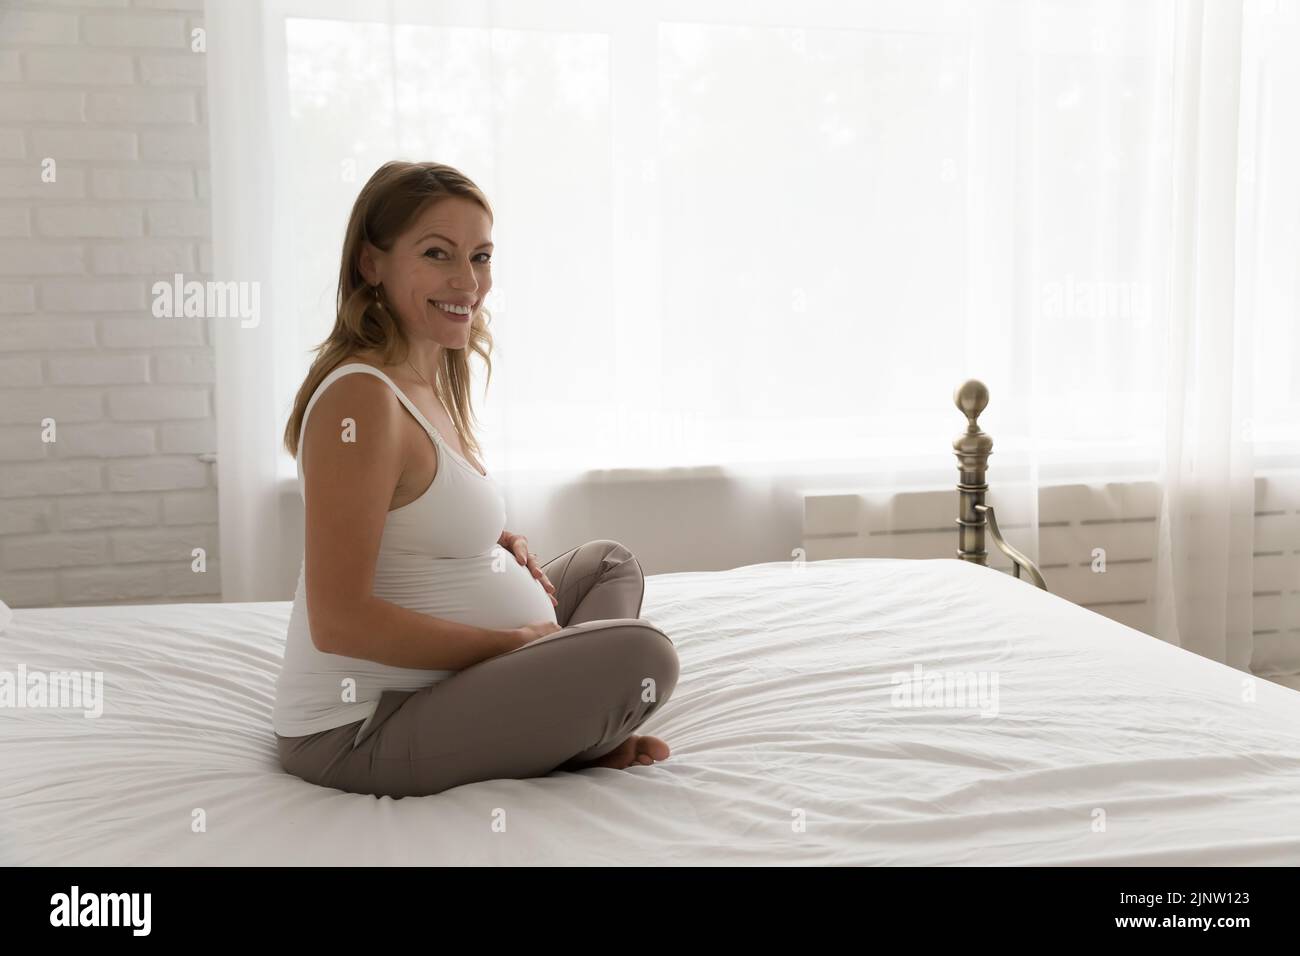 Attractive pregnant woman sits on bed smile looks at camera Stock Photo